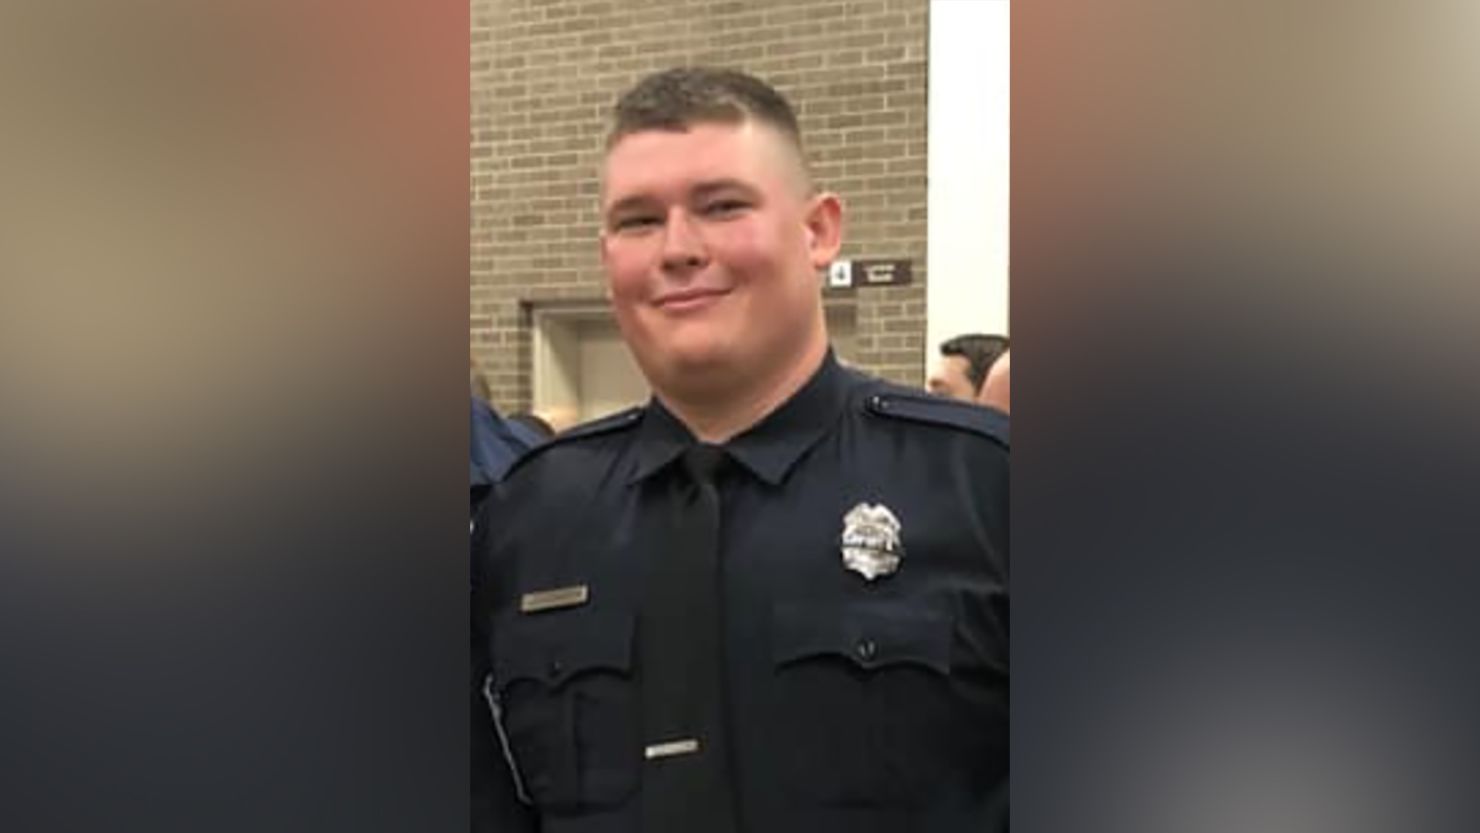 Jacob Hancher of the Myrtle Beach Police Department was killed Saturday.